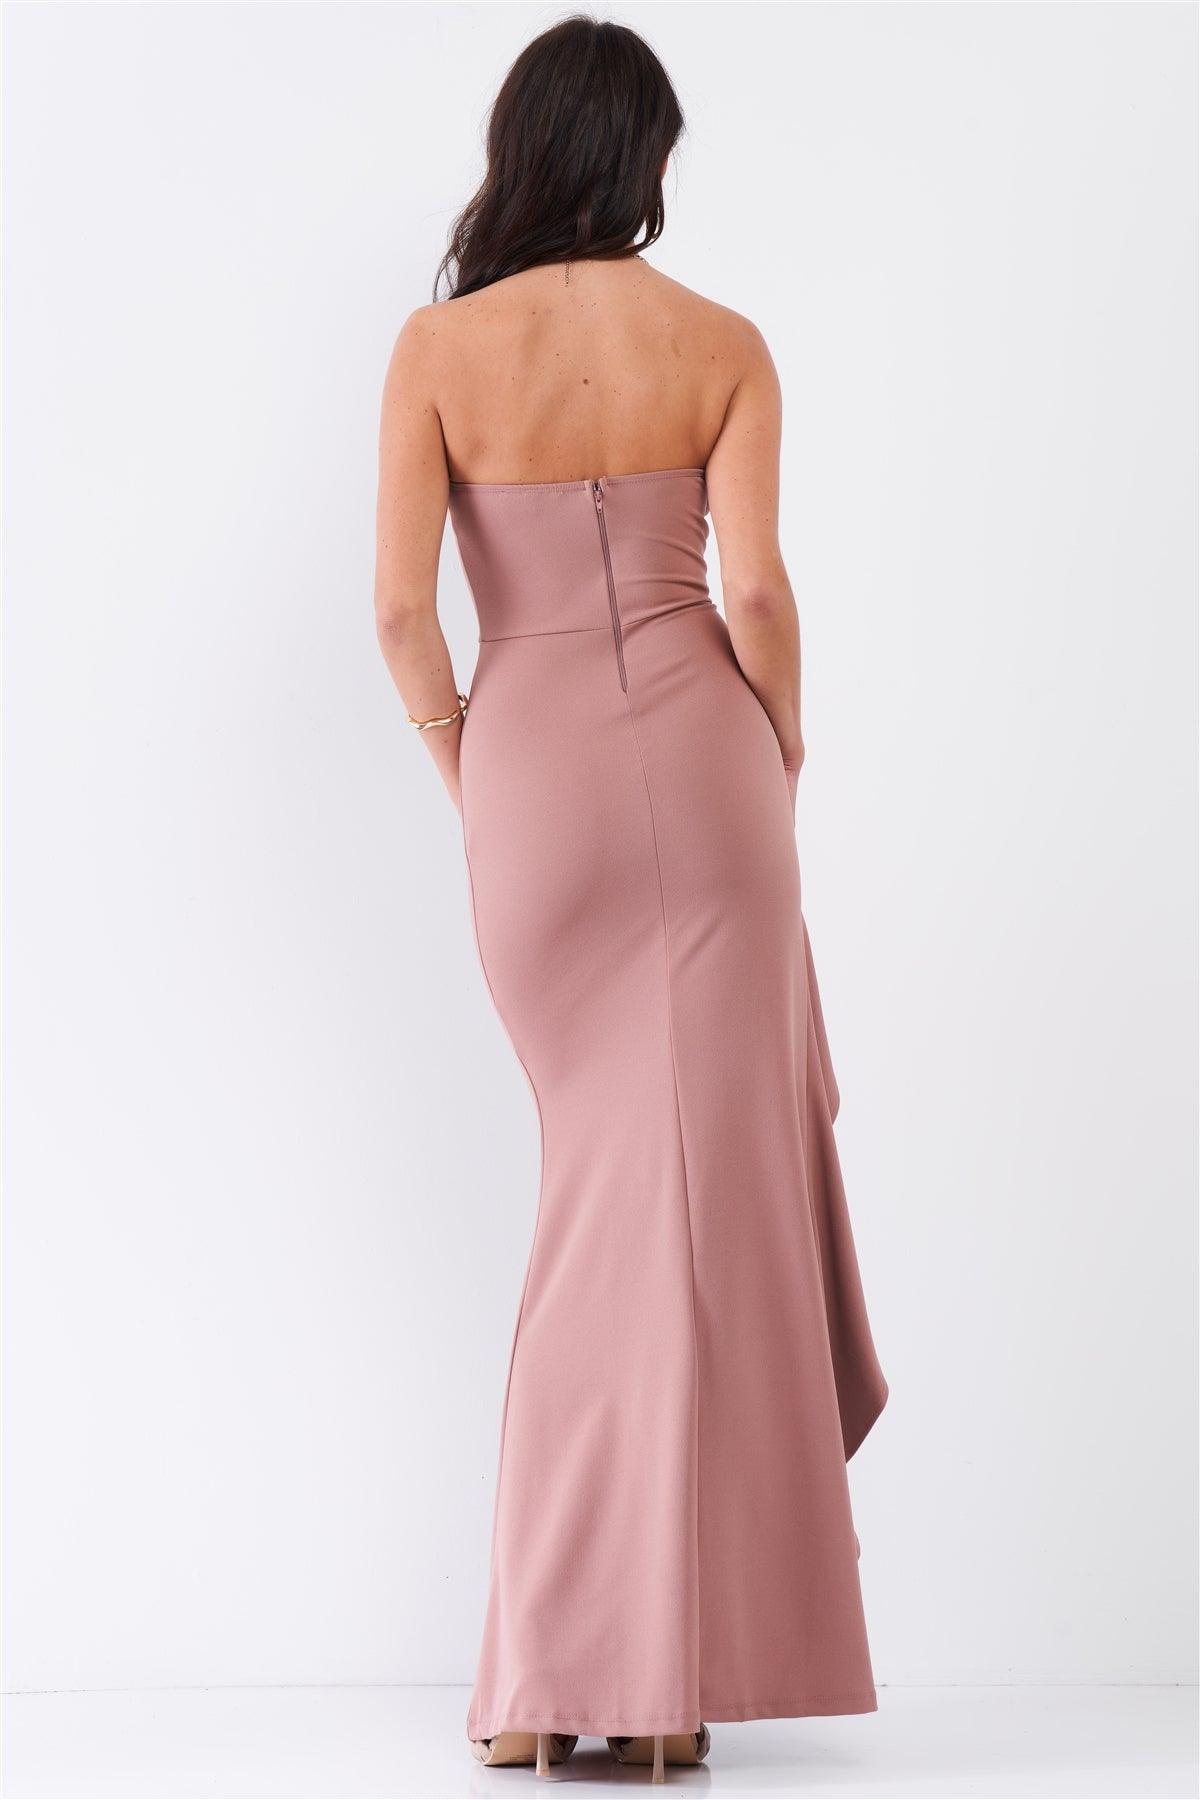 Rose Chocolate Sleeveless Plunging Sweetheart Neckline Ruffle Trim Front Slit Detail Fitted Maxi Dress